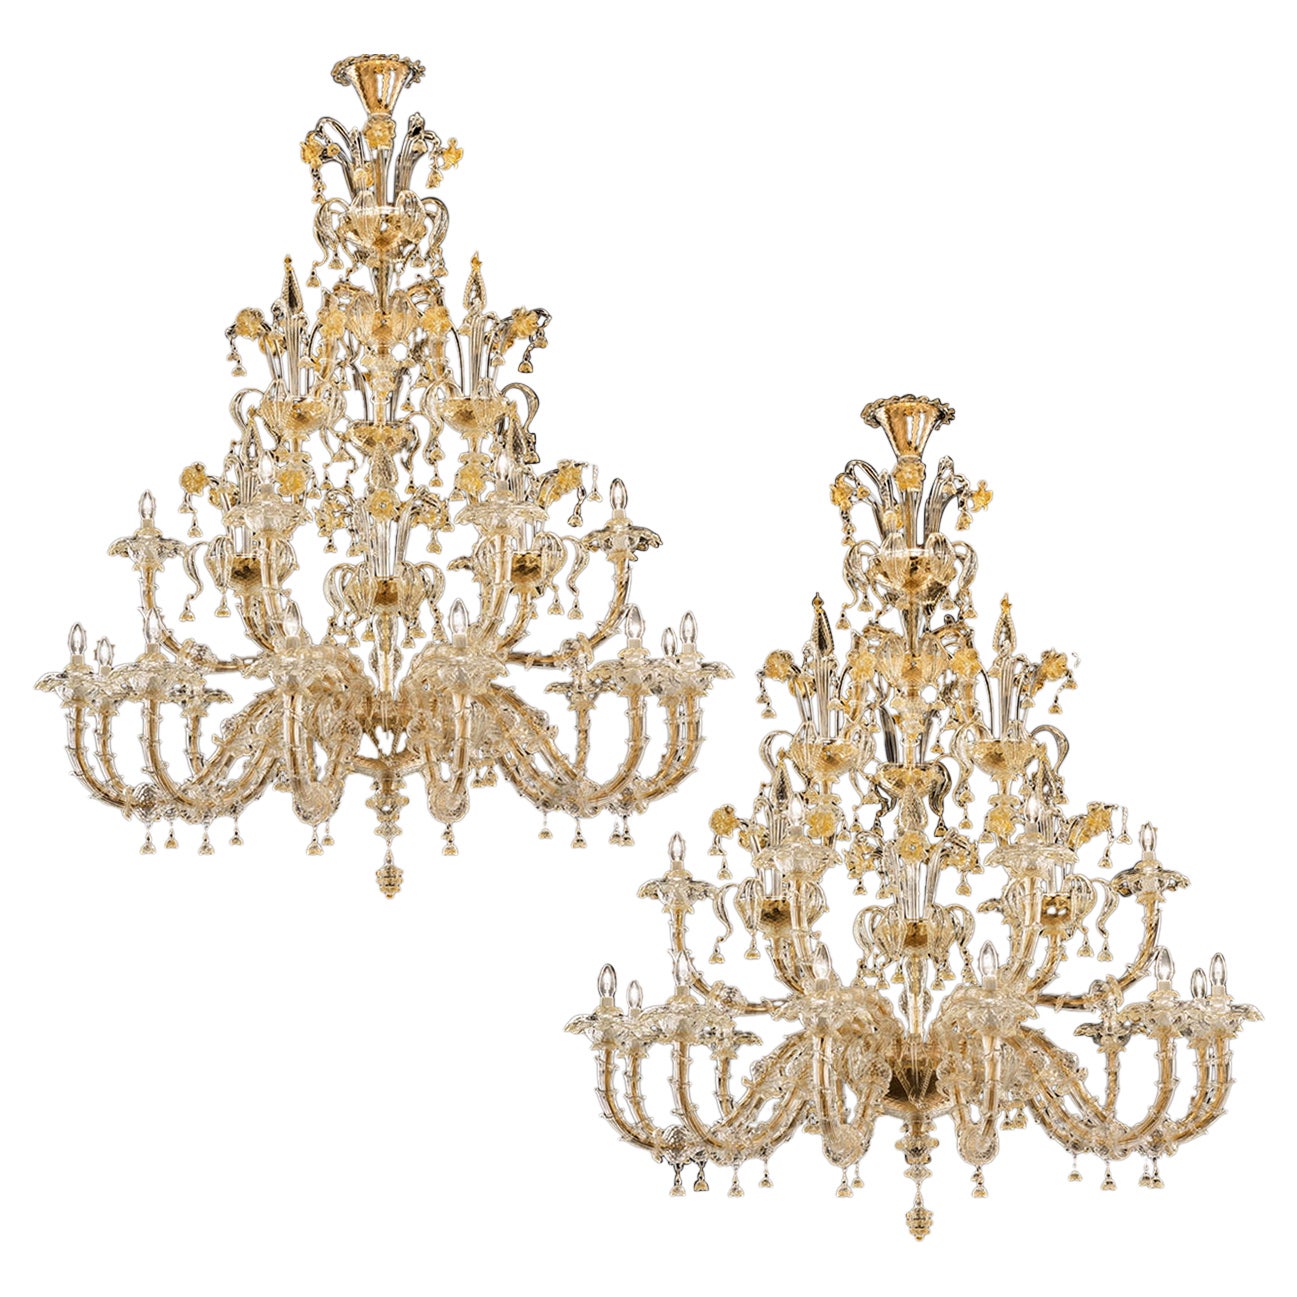 1 of the 2 Exceptional and Rich Chandeliers by Signoretto, Murano For Sale